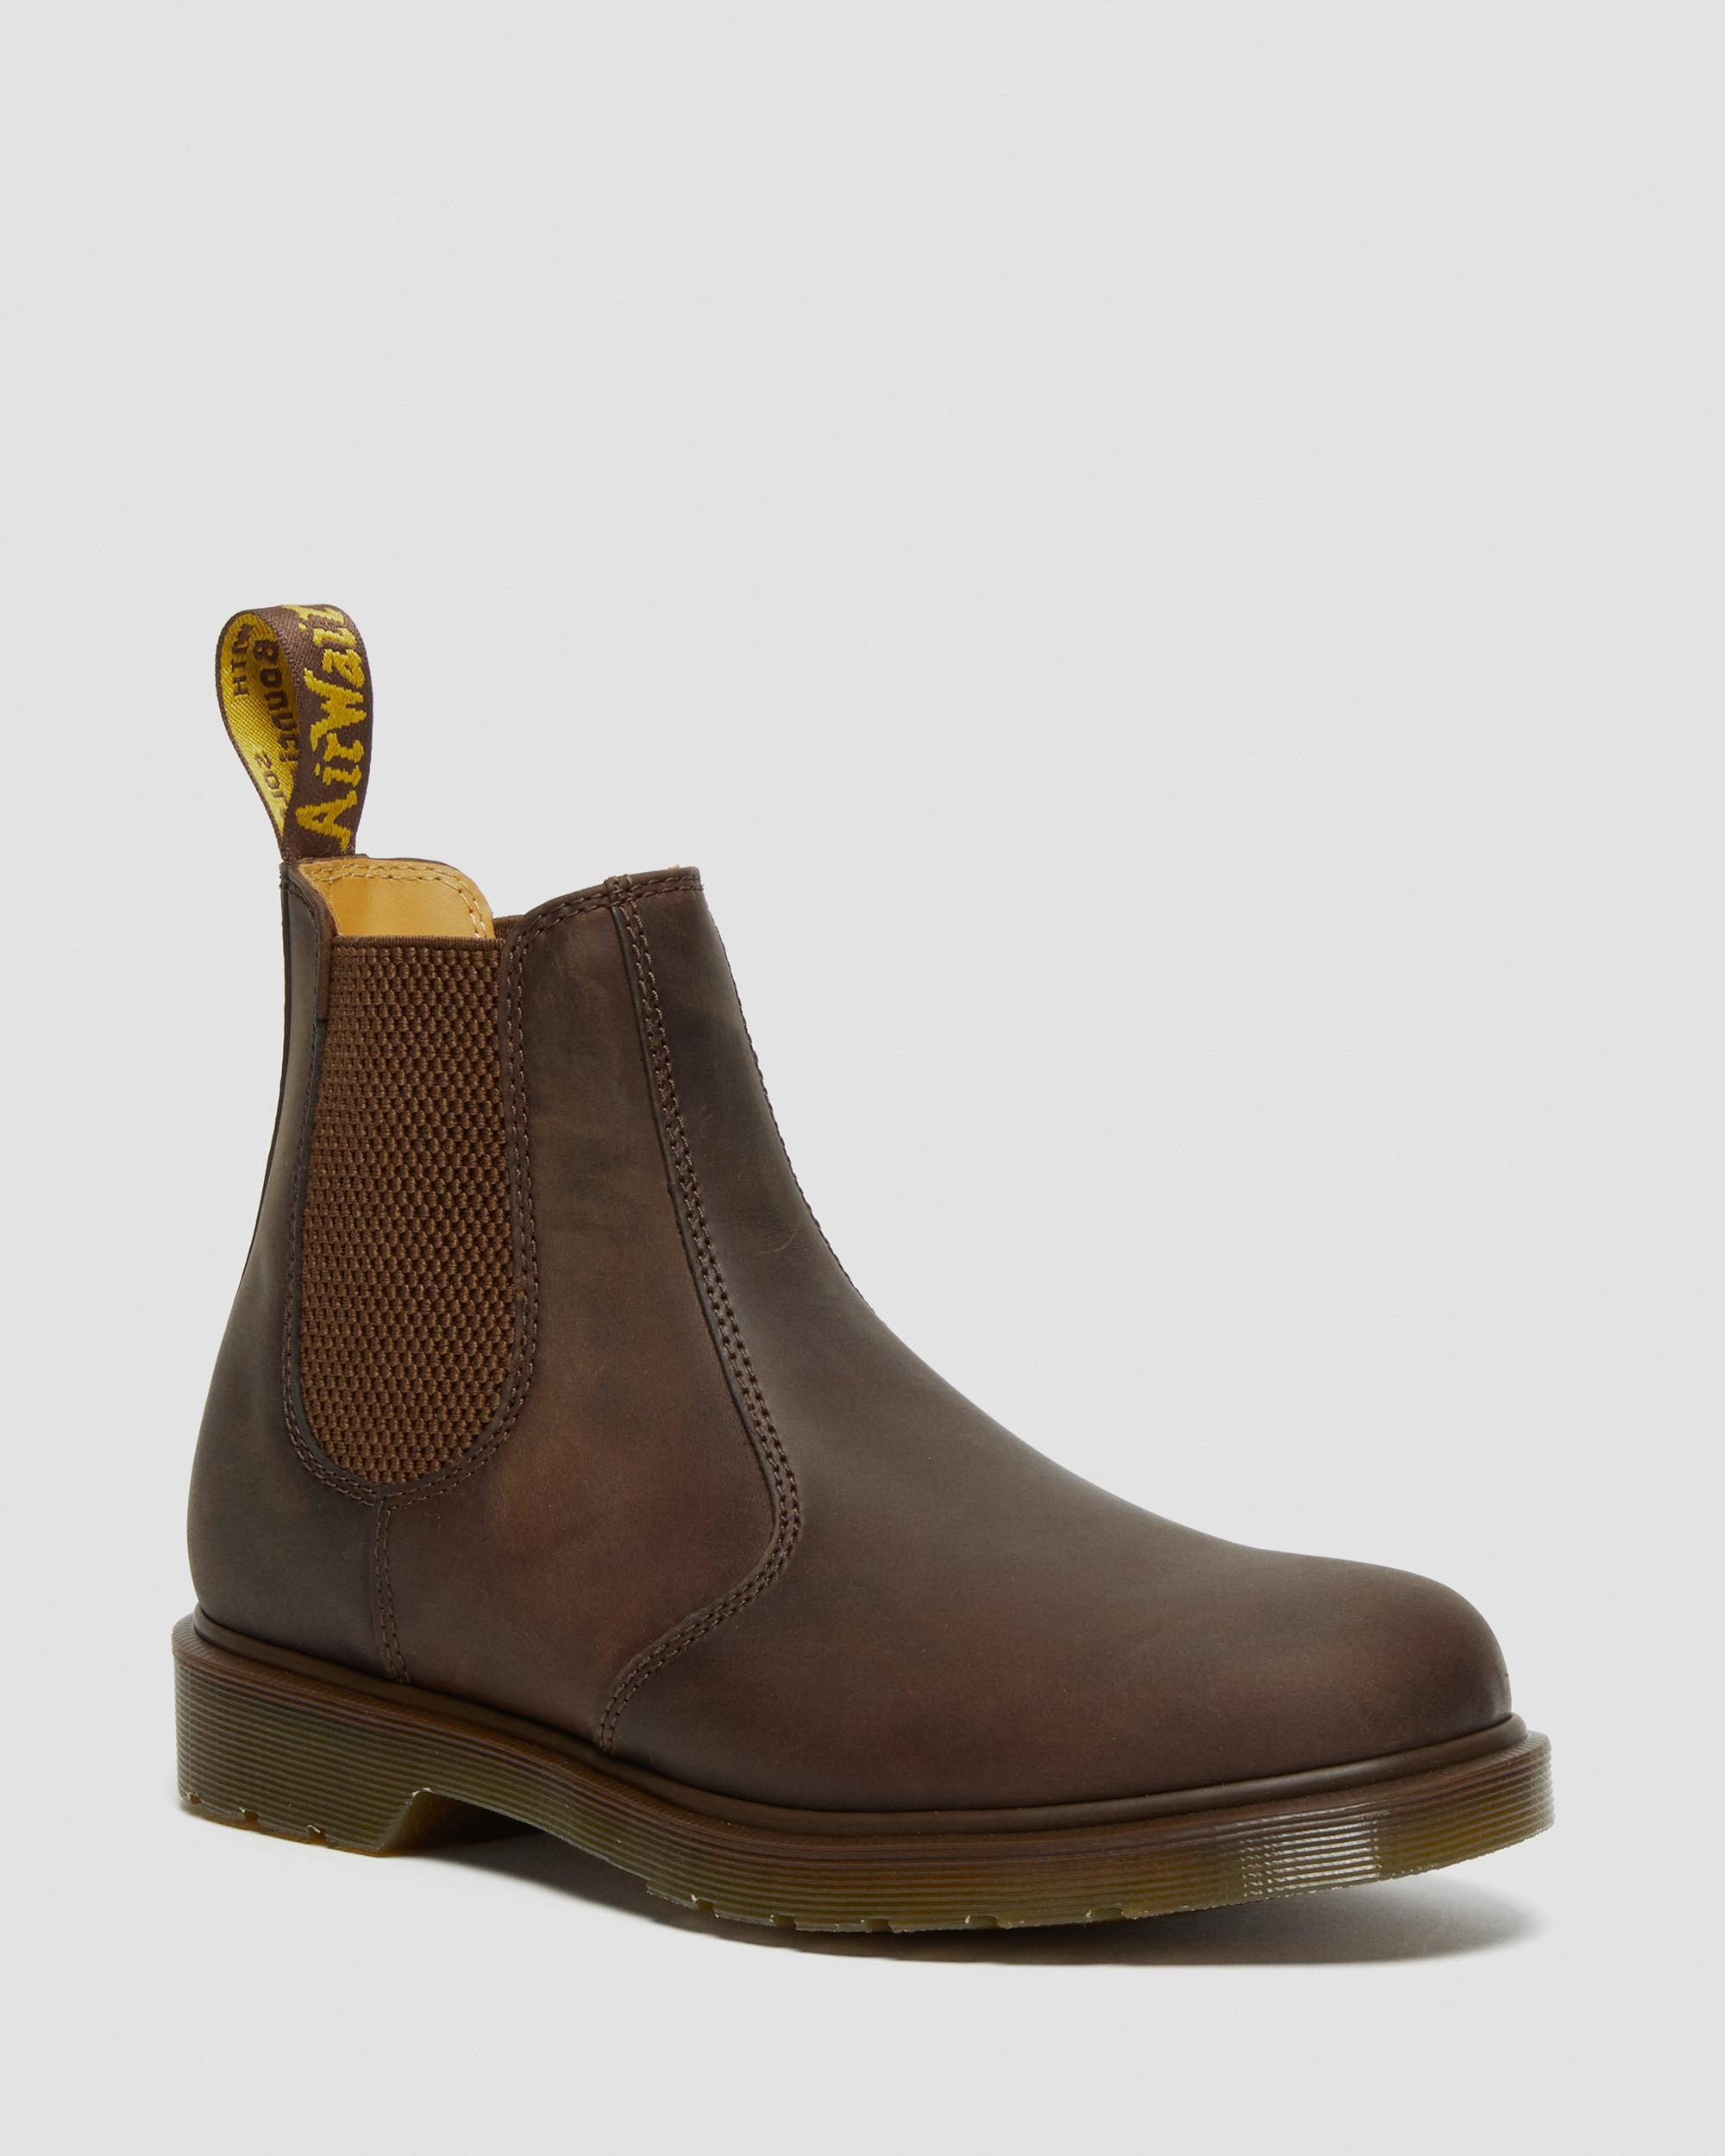 Chelsea boot ankle fit. Too loose? Suggestions on brands with tighter ankles?  : r/mensfashionadvice